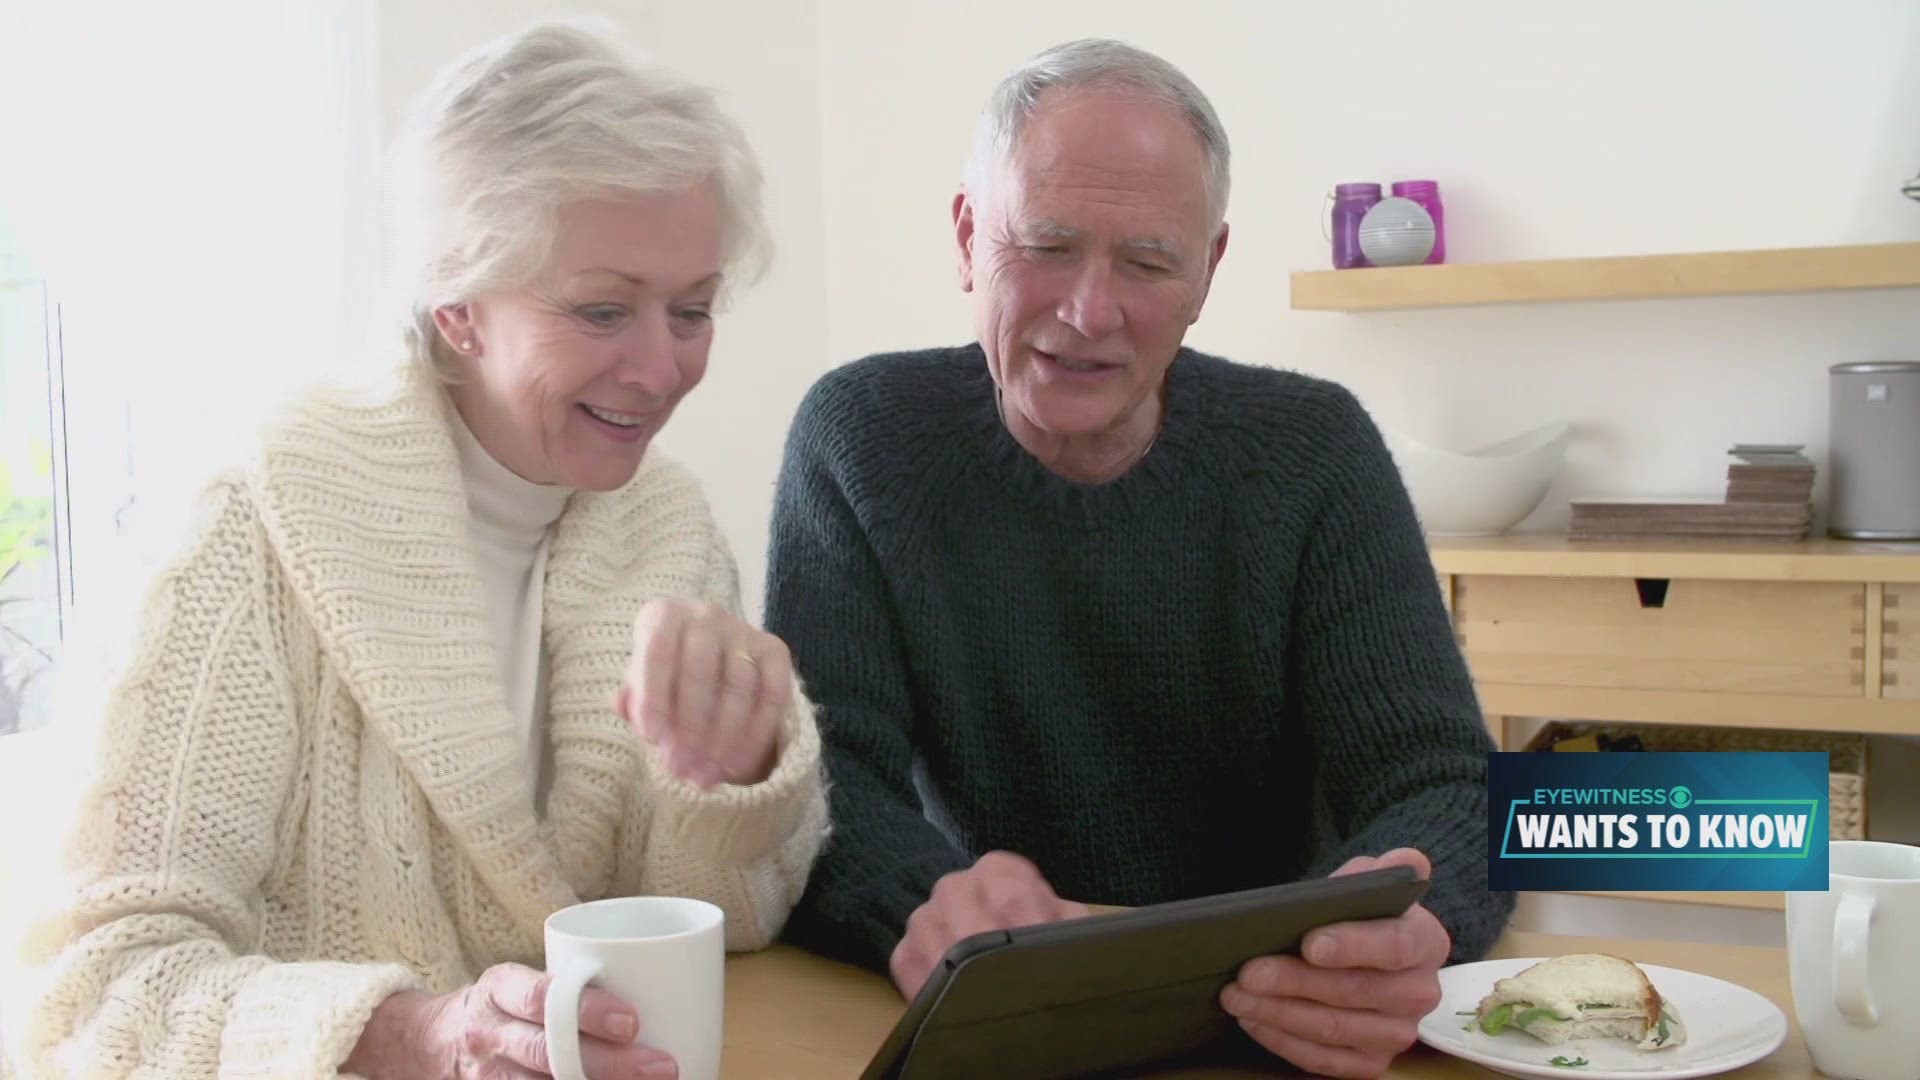 Technology and the internet can be intimidating for seniors. Thankfully, there are resources and services that can help.